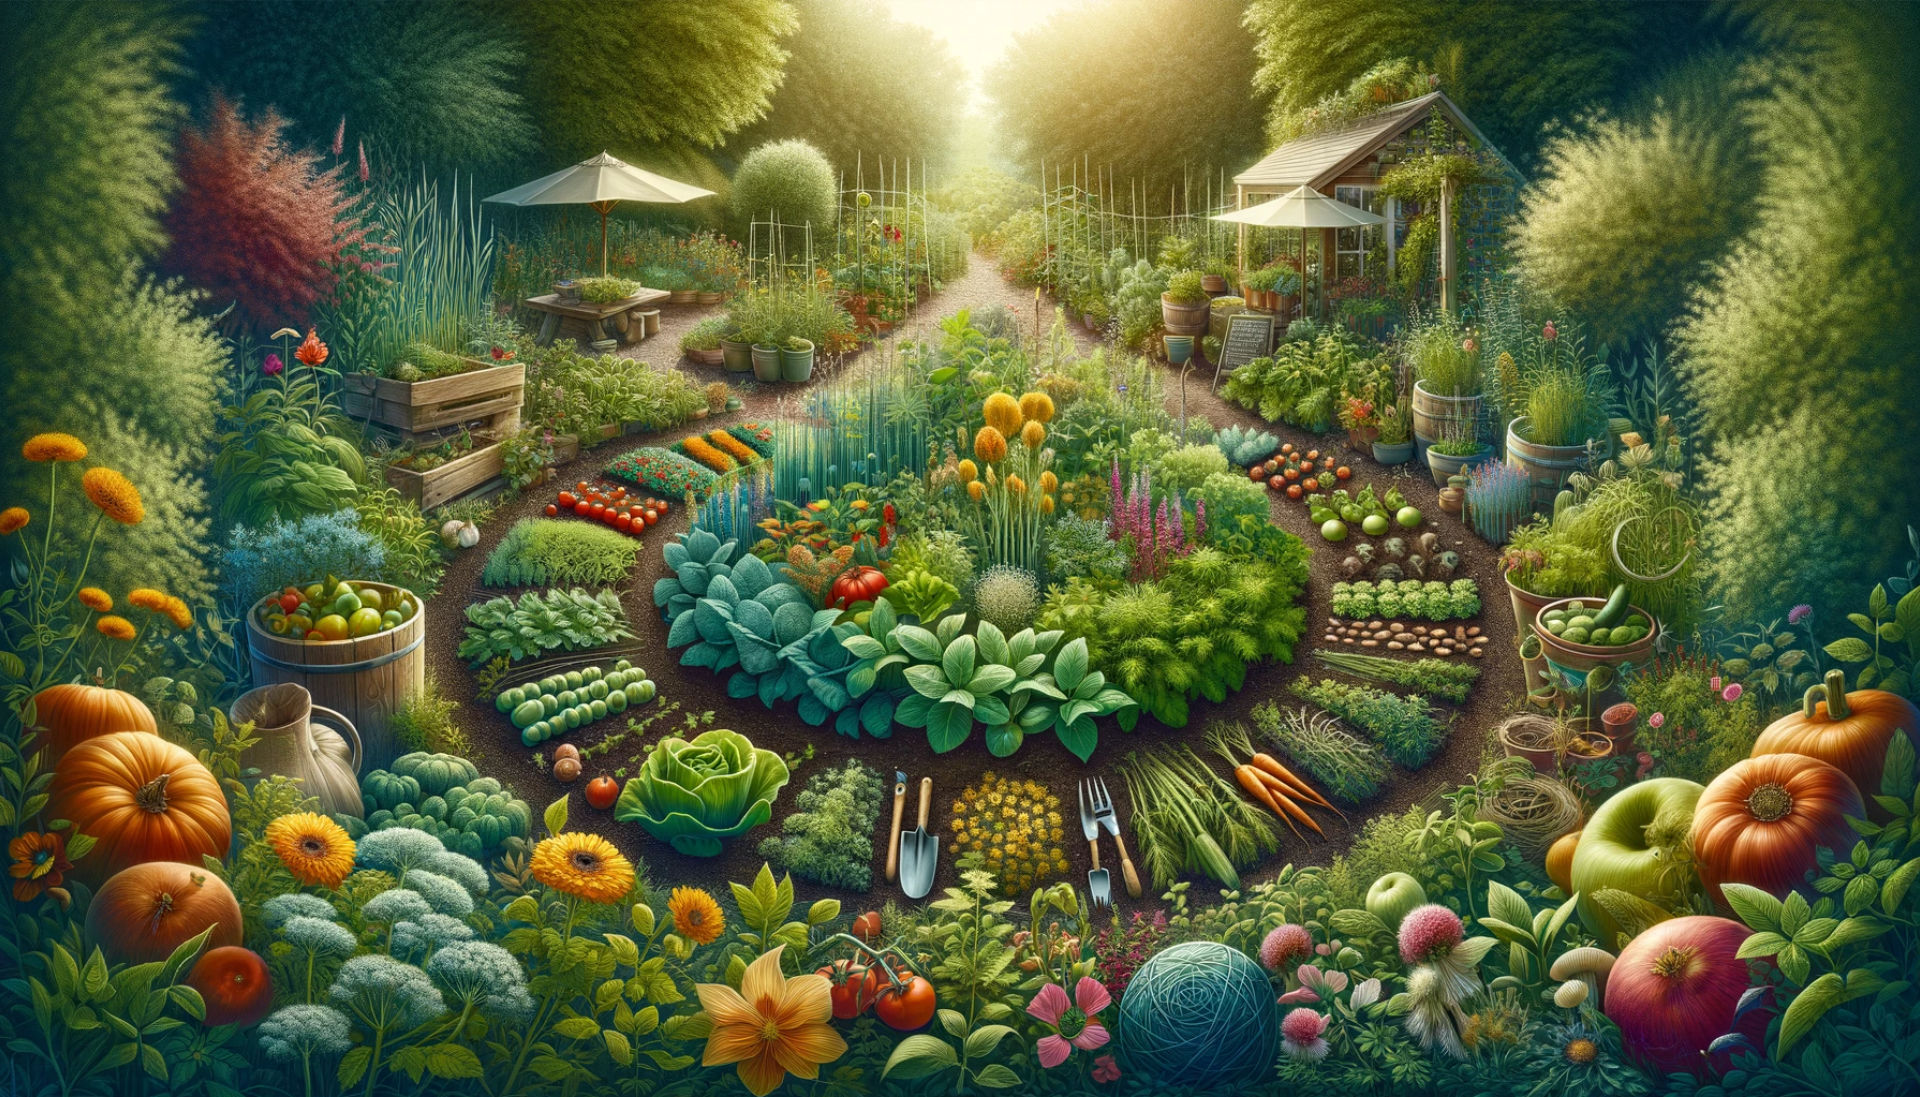 This garden scene captures the essence of a healthy, diverse garden, where a variety of plants coexist harmoniously, illustrating the transformative power of understanding and utilising plant companionship.